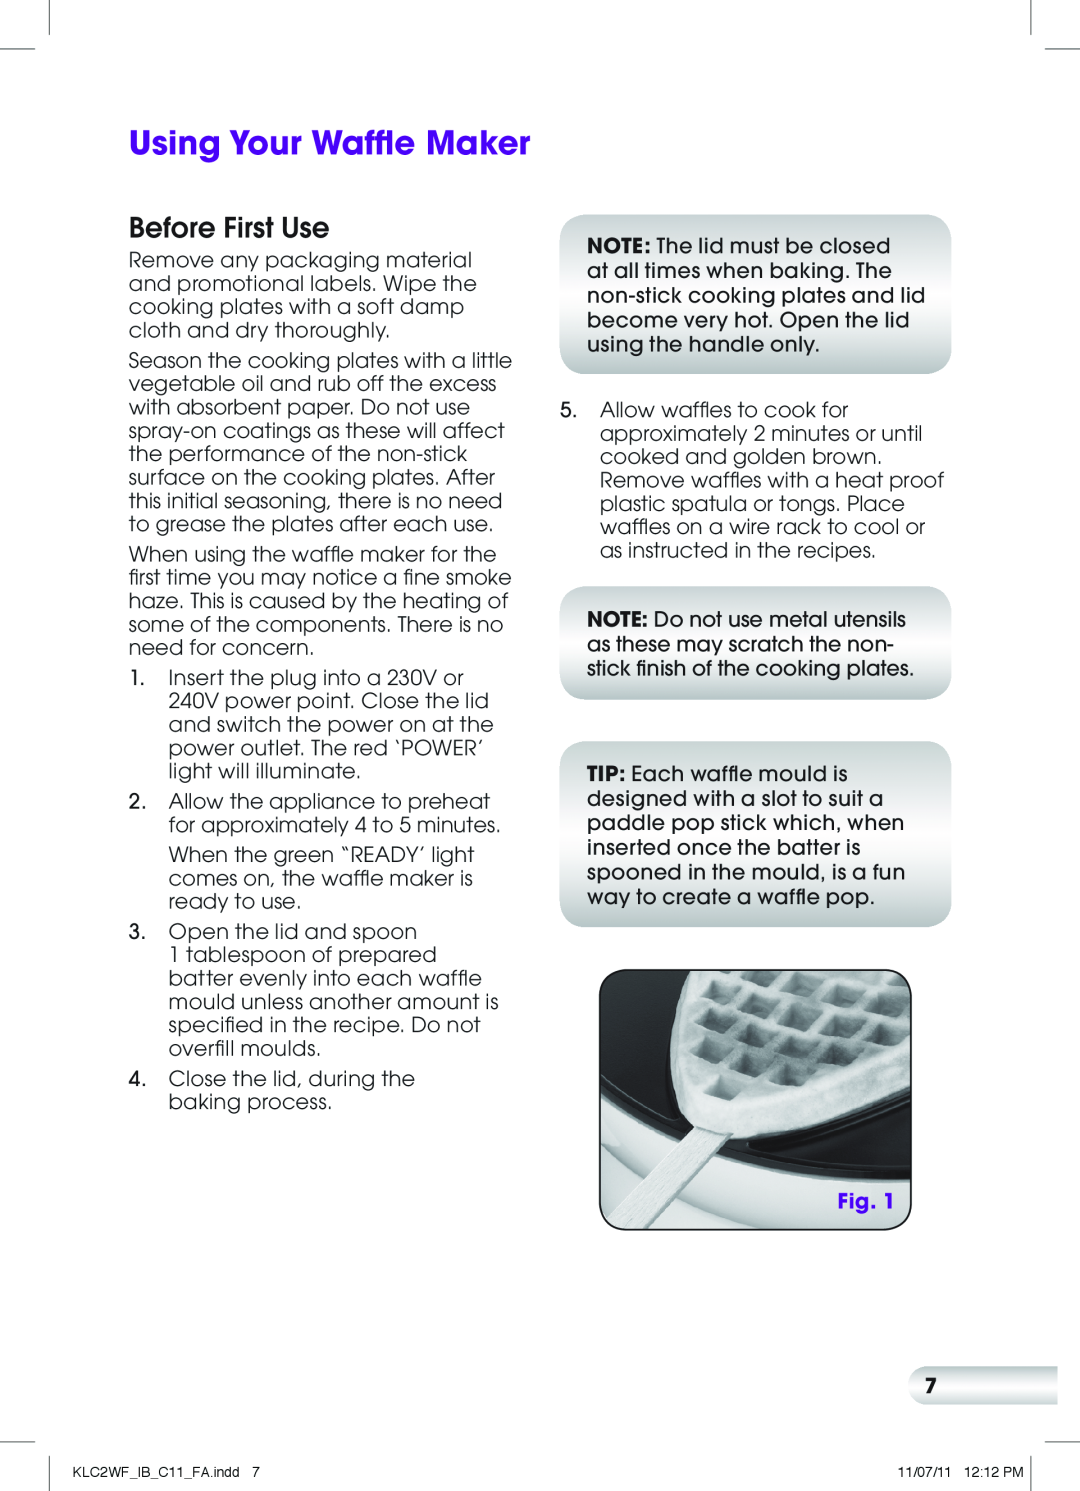 Kambrook KLC2WF manual Using Your Waffle Maker, Before First Use 